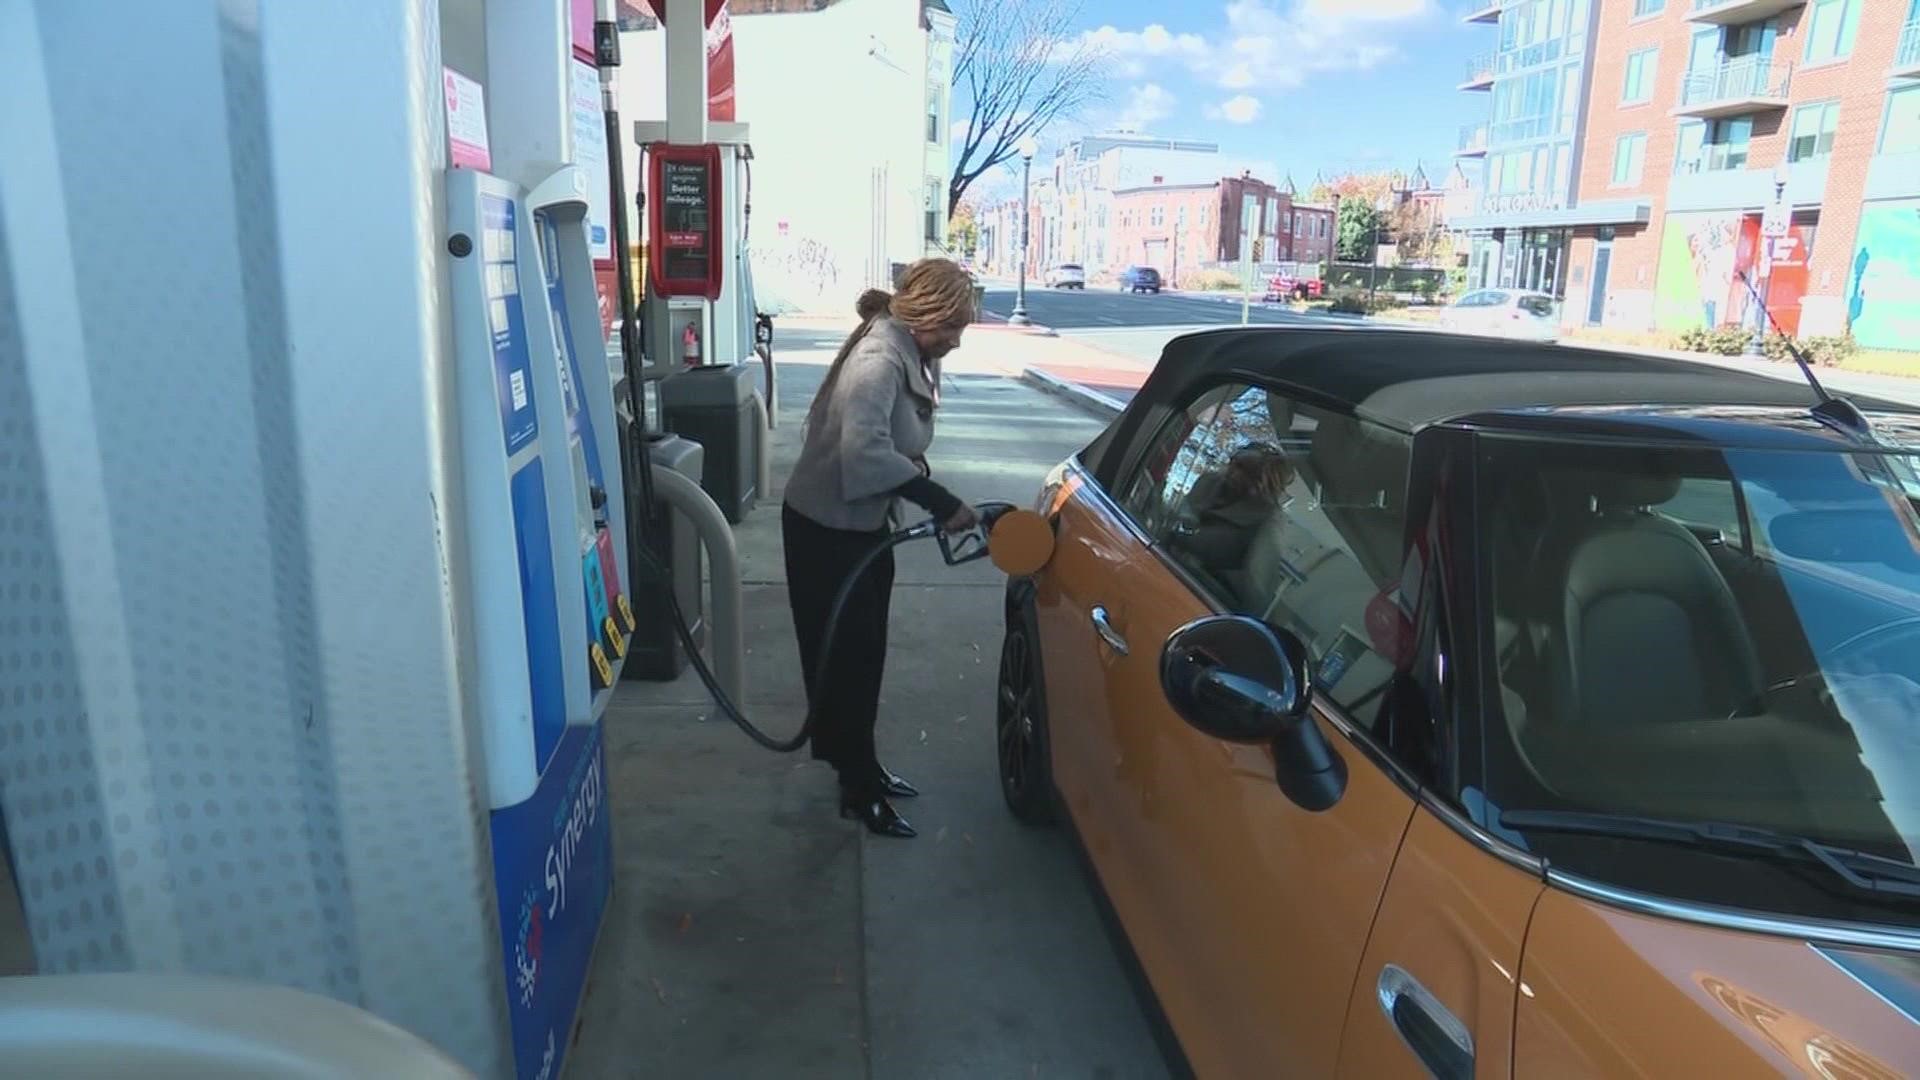 Big Oil was in the hot seat Wednesday in Congress over sky-high gas prices.